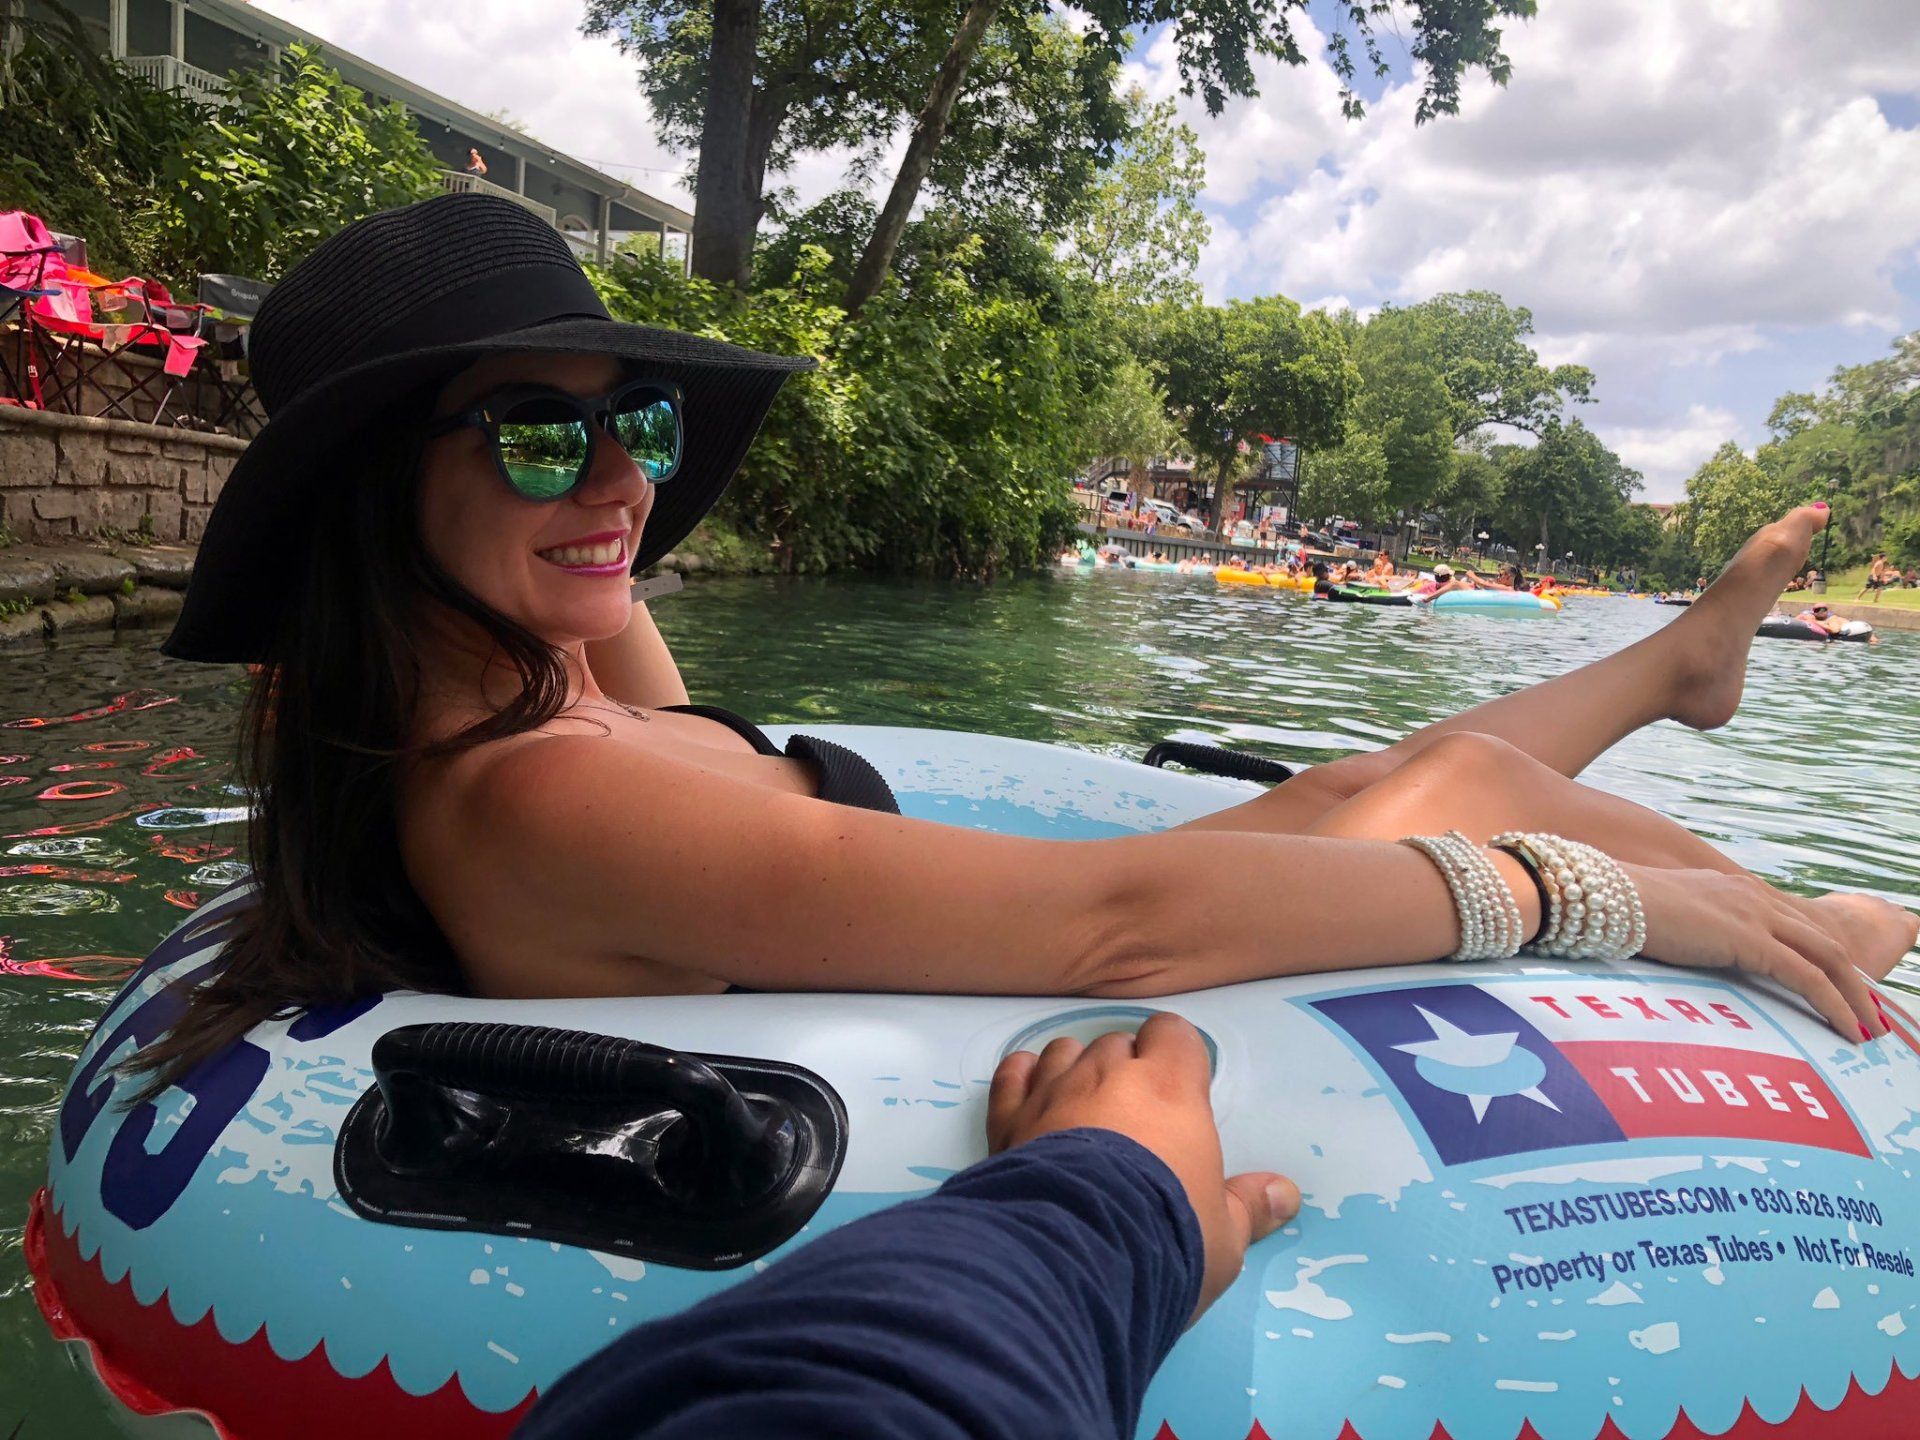 Relaxing on an inner tube just drifting down the beautiful Comal River at Texas Tubes near Houston!